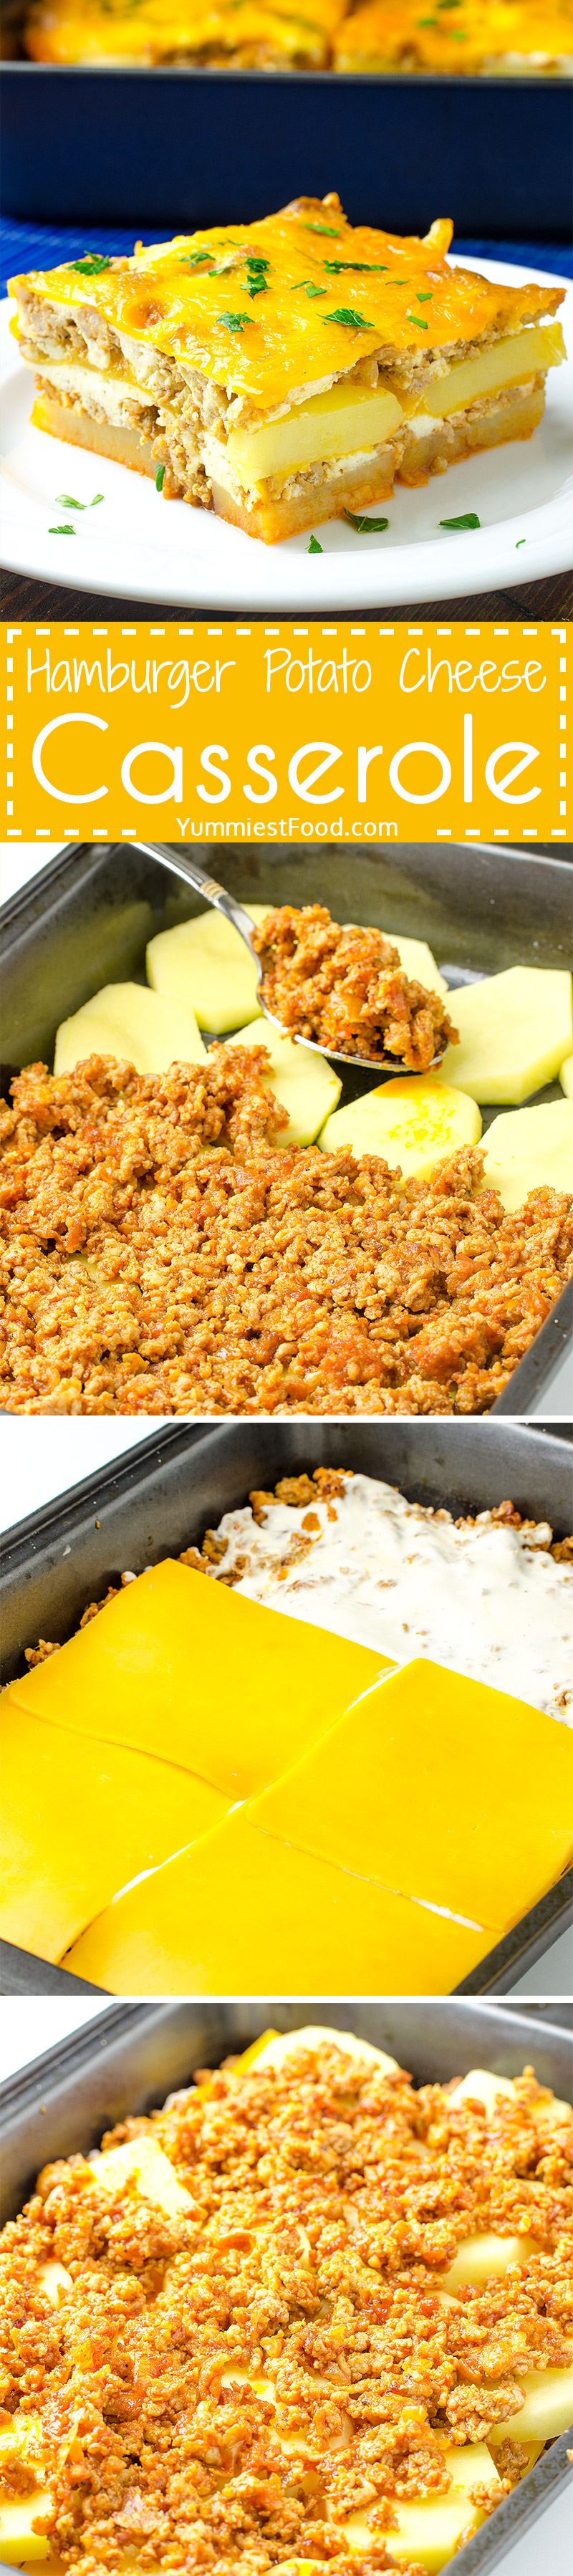 HAMBURGER POTATO CHEESE CASSEROLE - This easy dish is full of flavor and makes a fun dinner the whole family will love